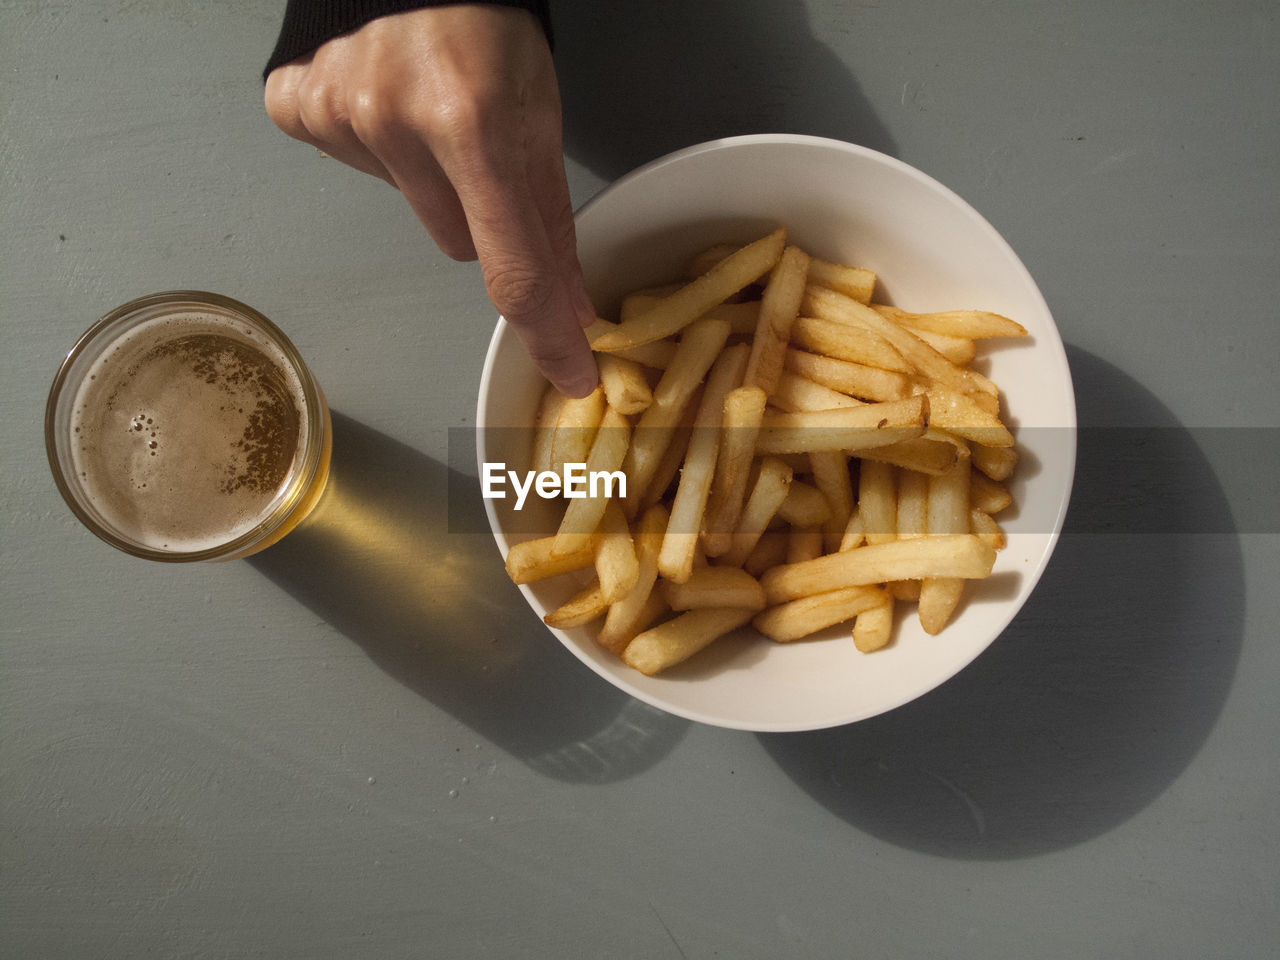 Cropped hand reaching towards french fries by beer on table